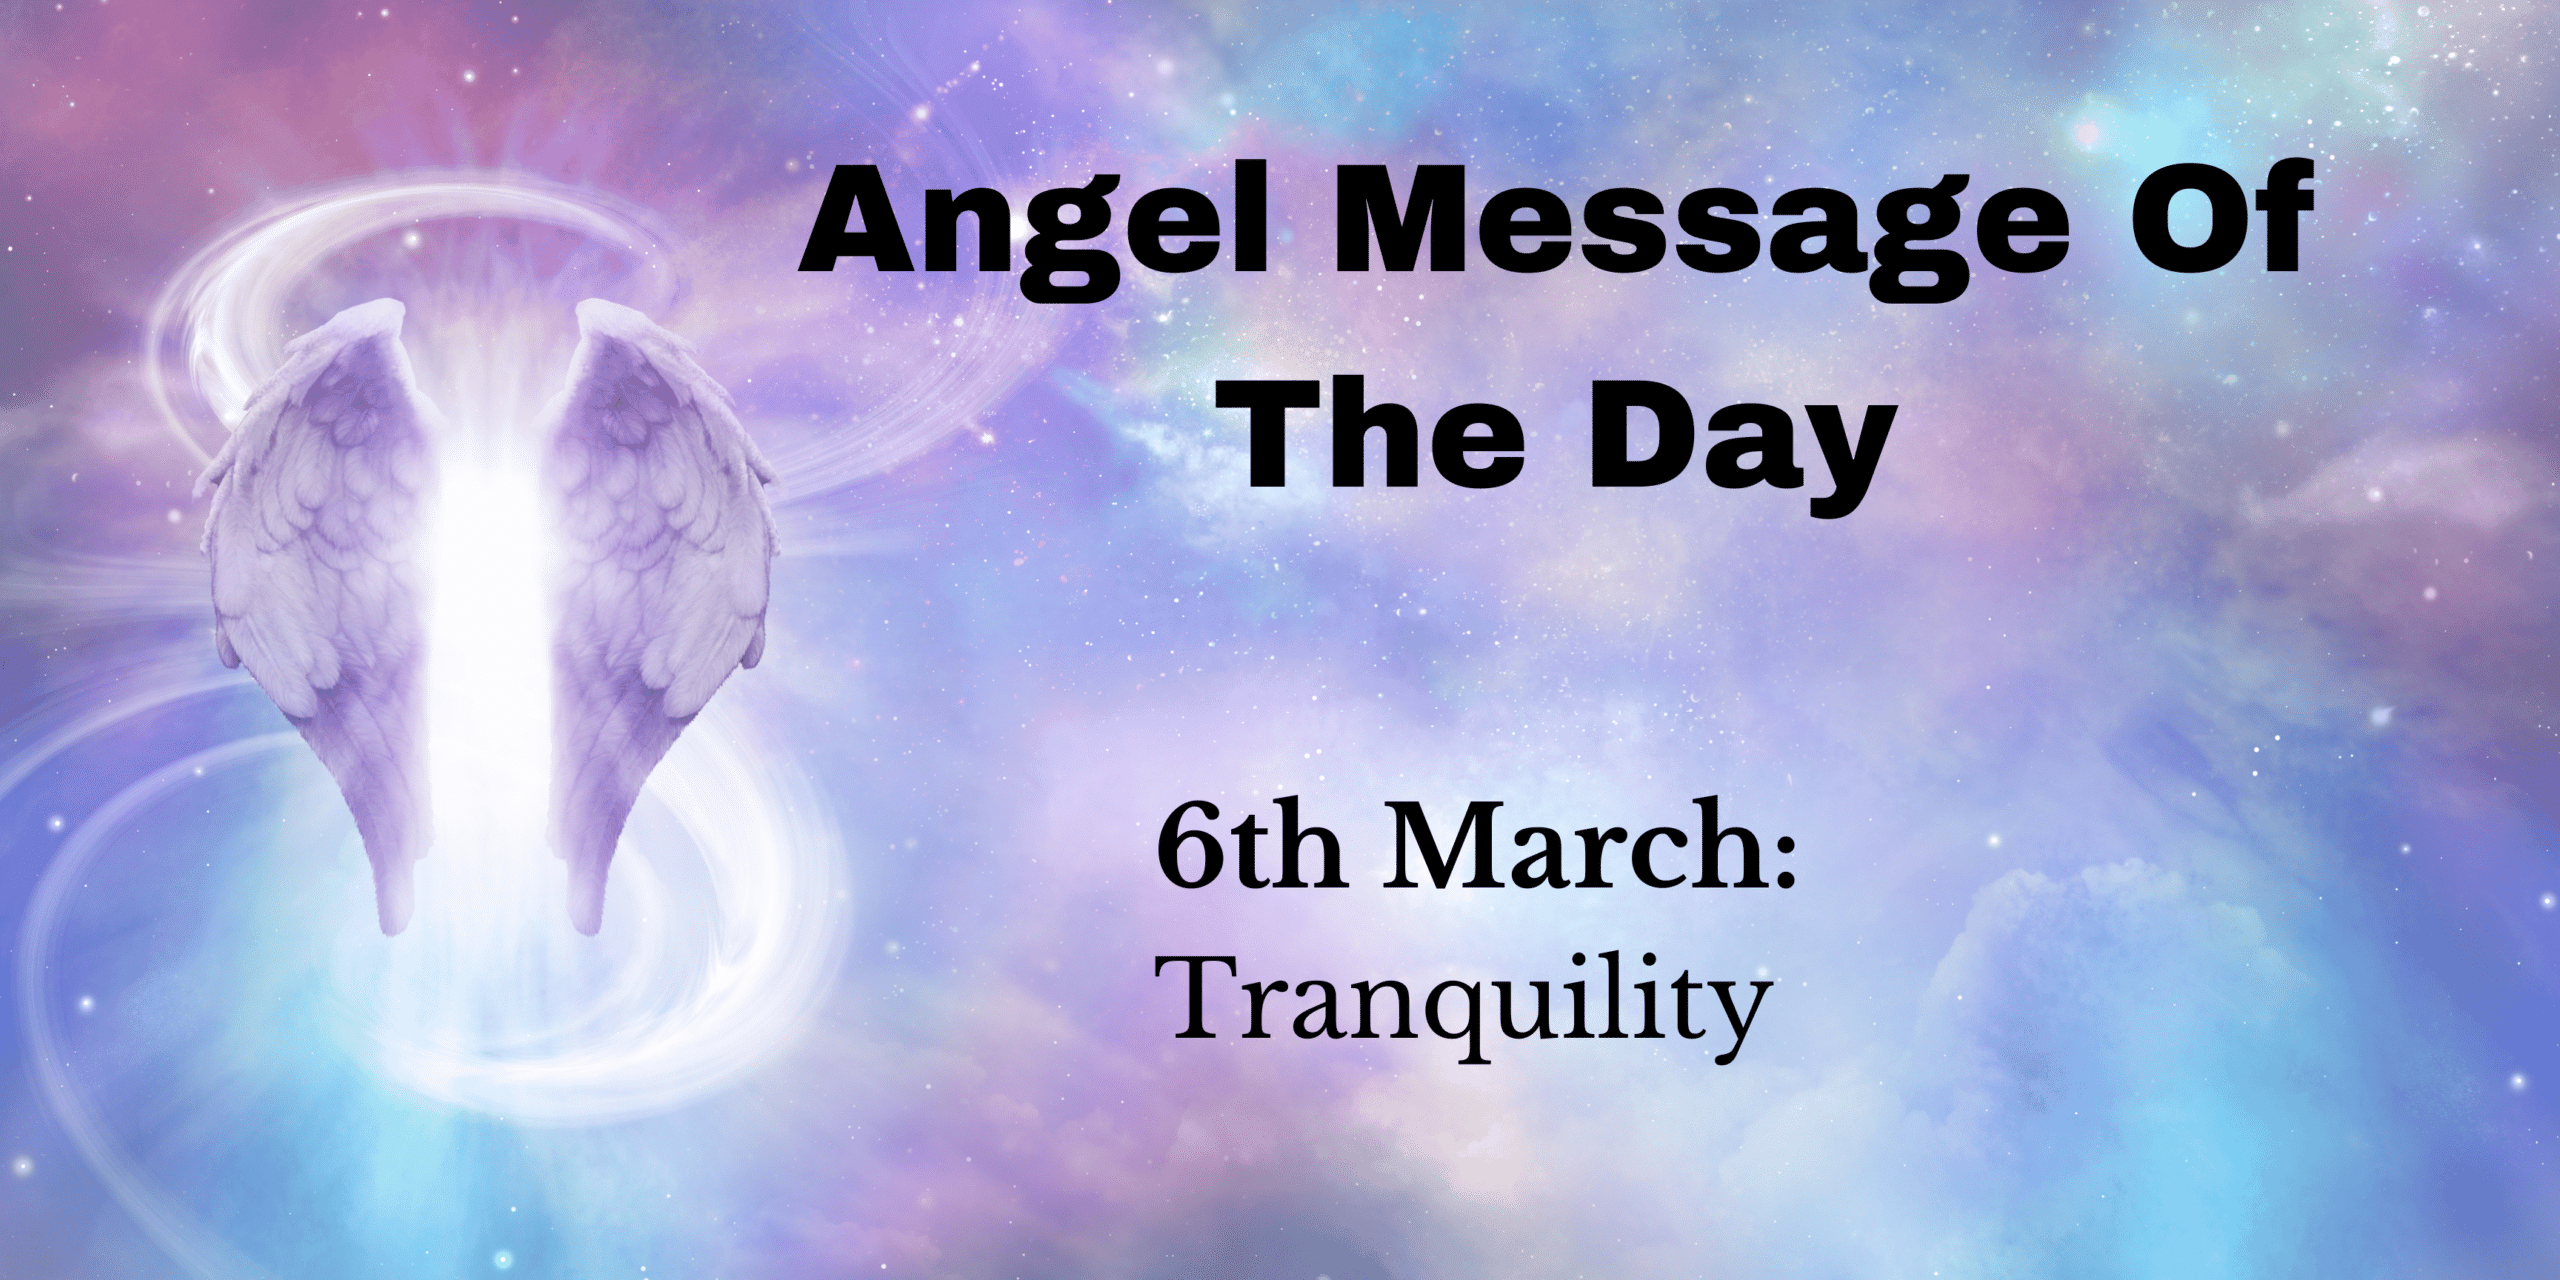 angel message of the day : tranquility